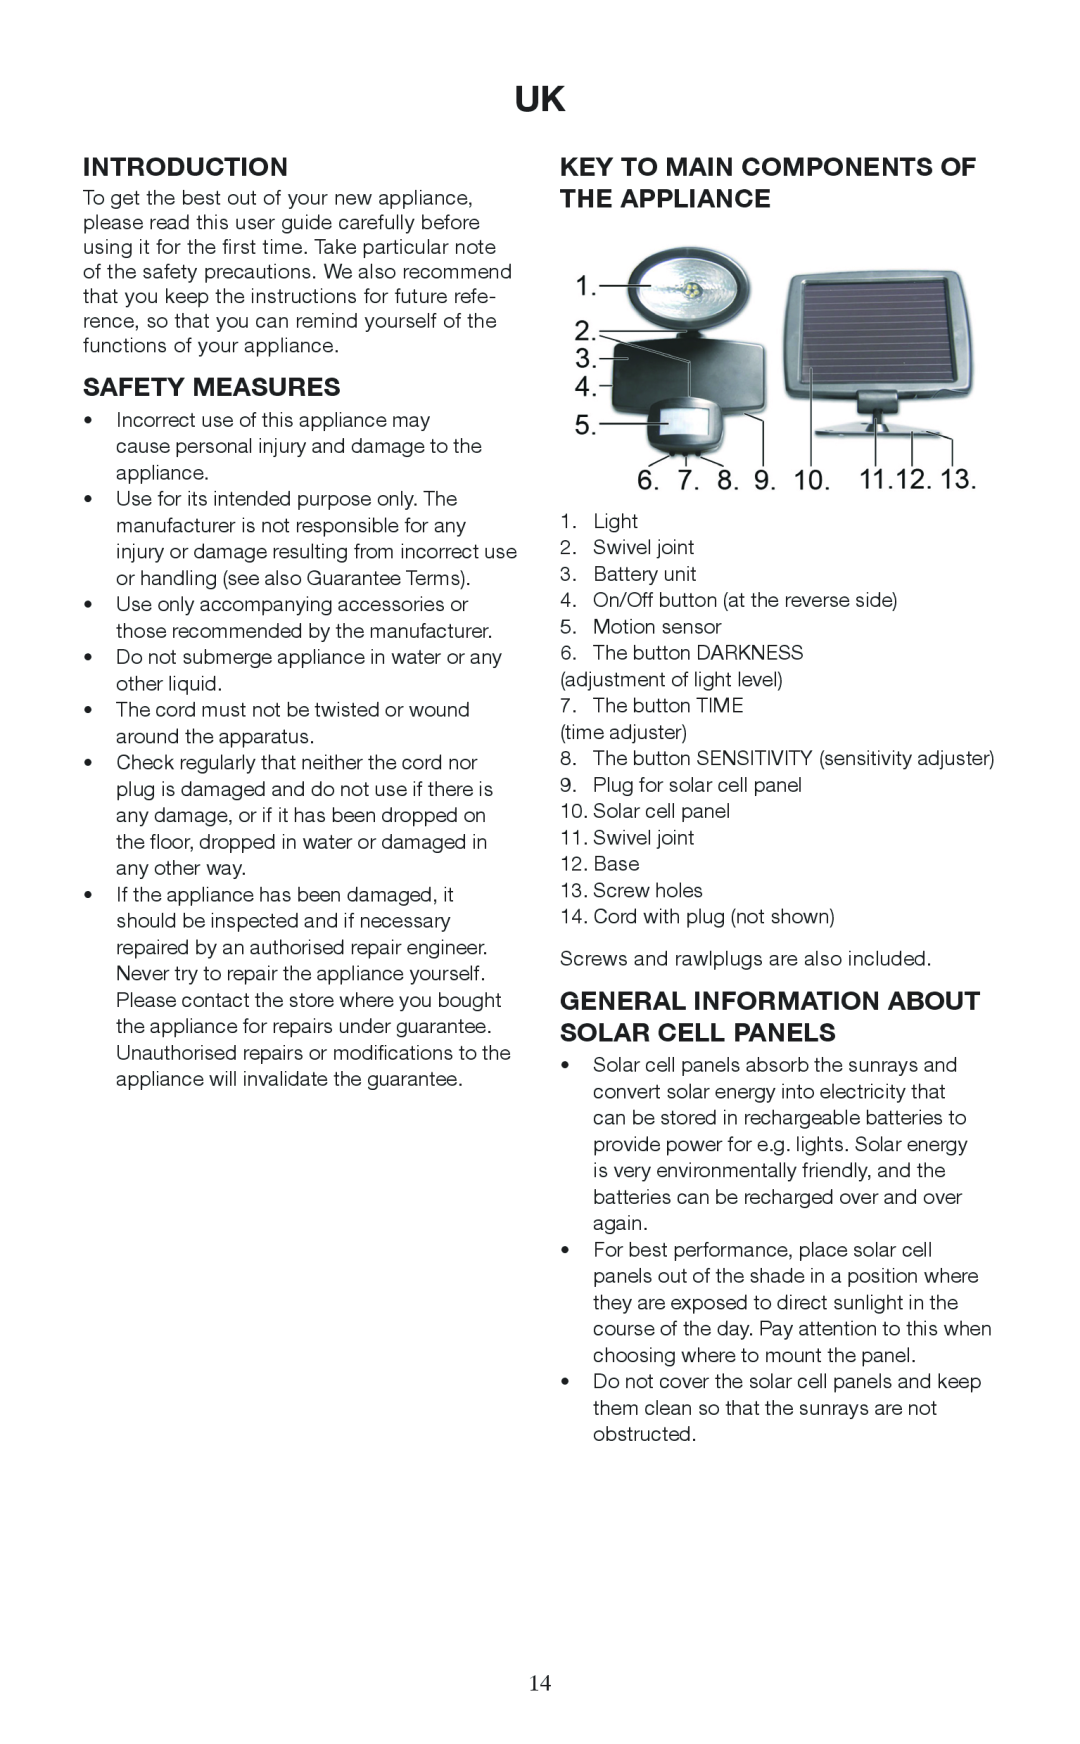 Melissa 677-001 manual Introduction, Safety Measures, Key To Main Components Of The Appliance 